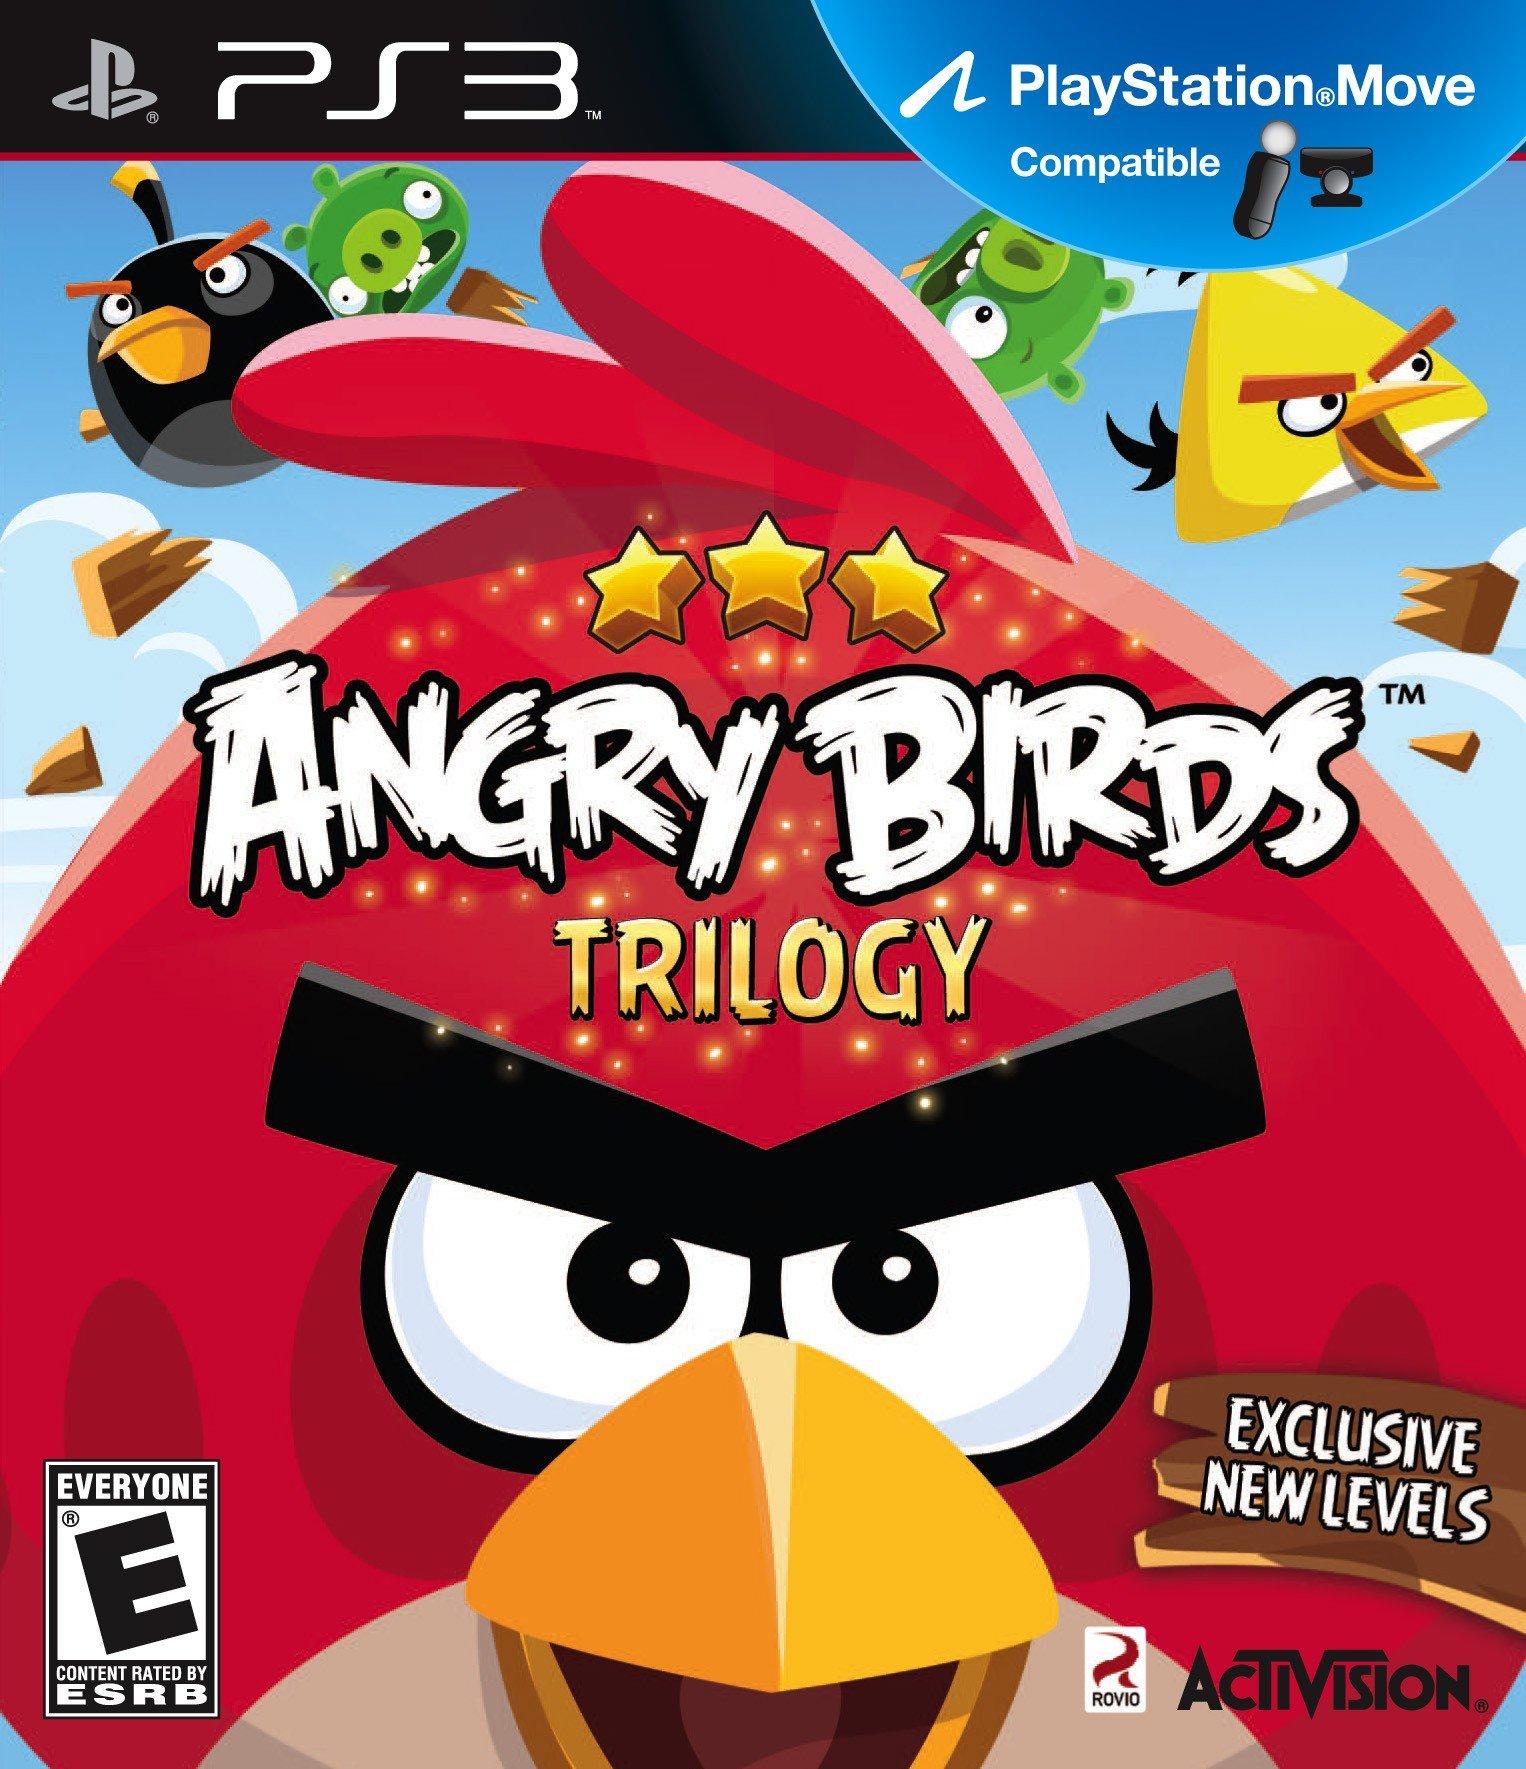 Angry Birds Trilogy - Xbox 360